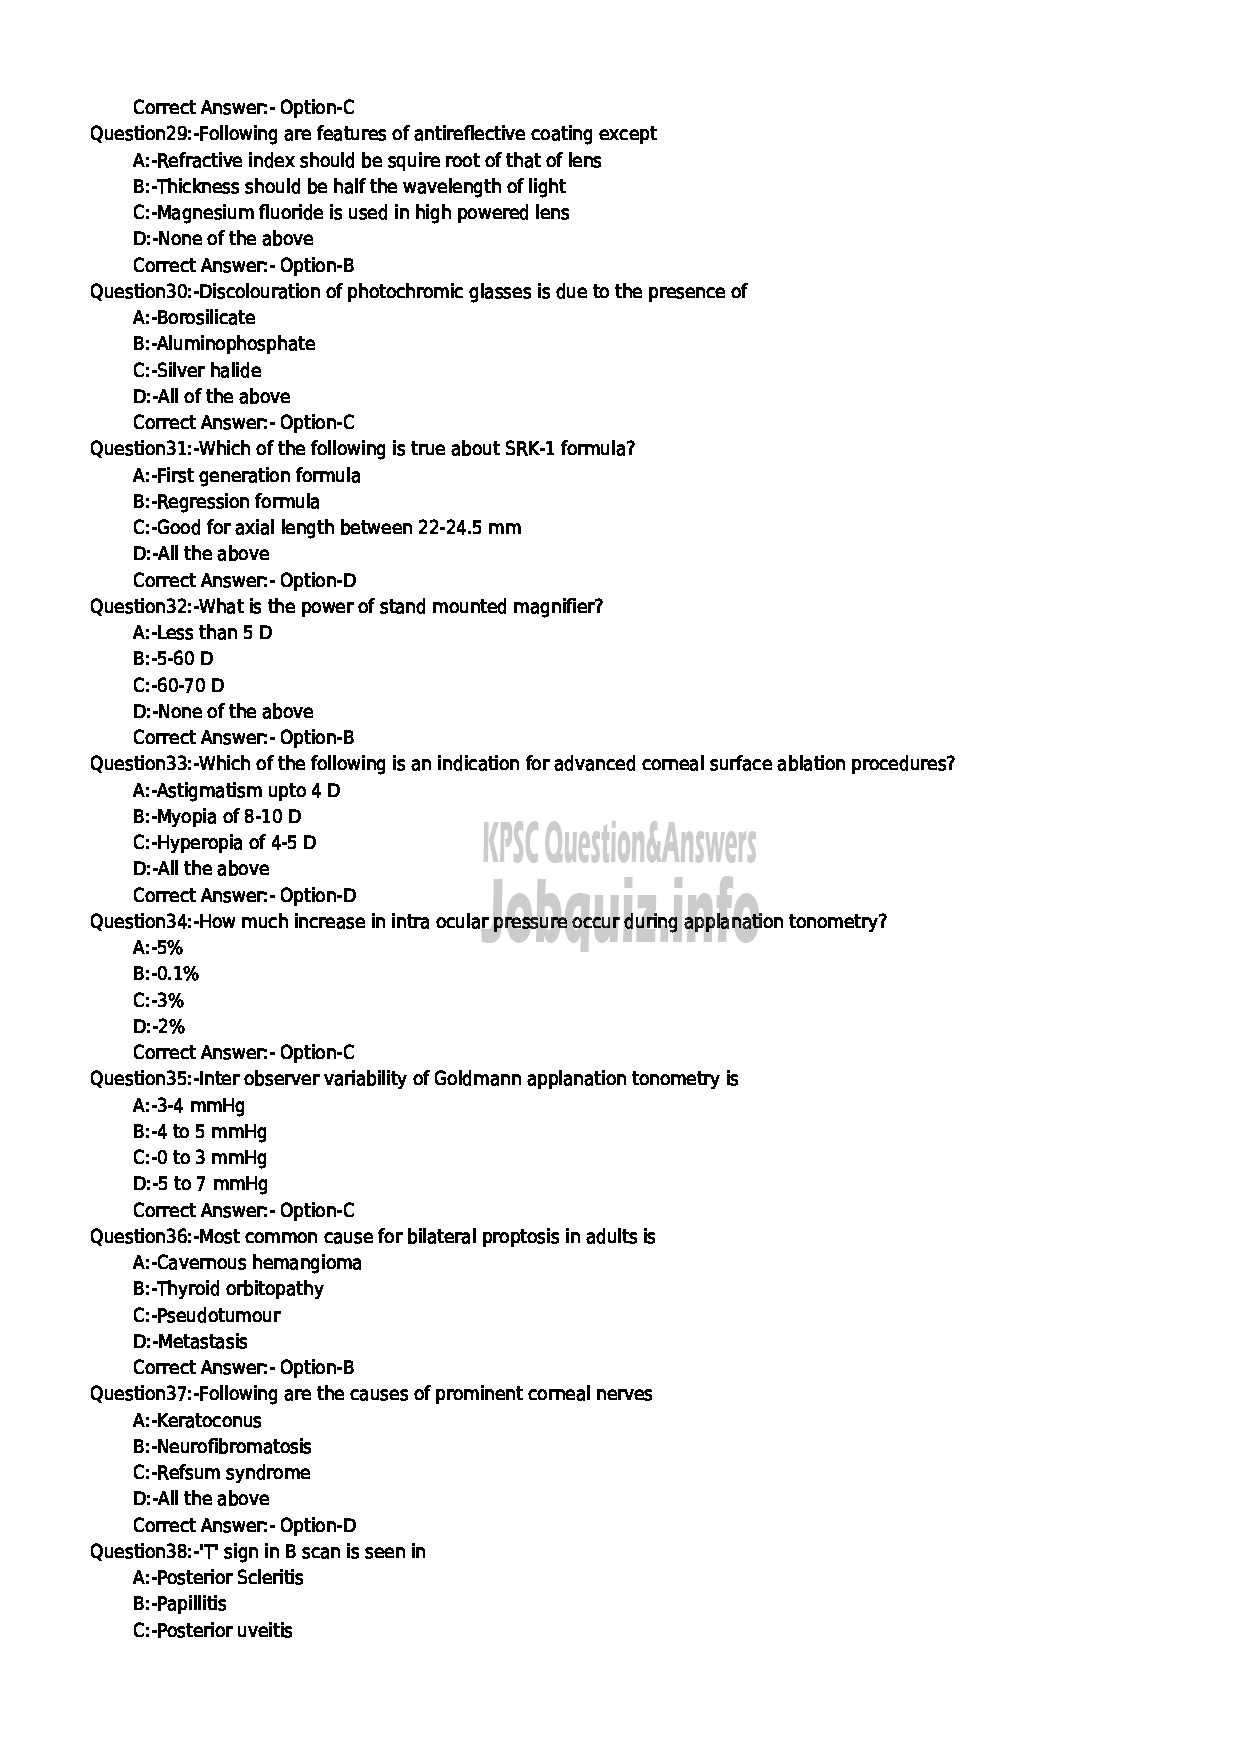 Kerala PSC Question Paper - SENIOR LECTURER IN OPTHALMOLOGY NCA MEDICAL EDUCATION-4